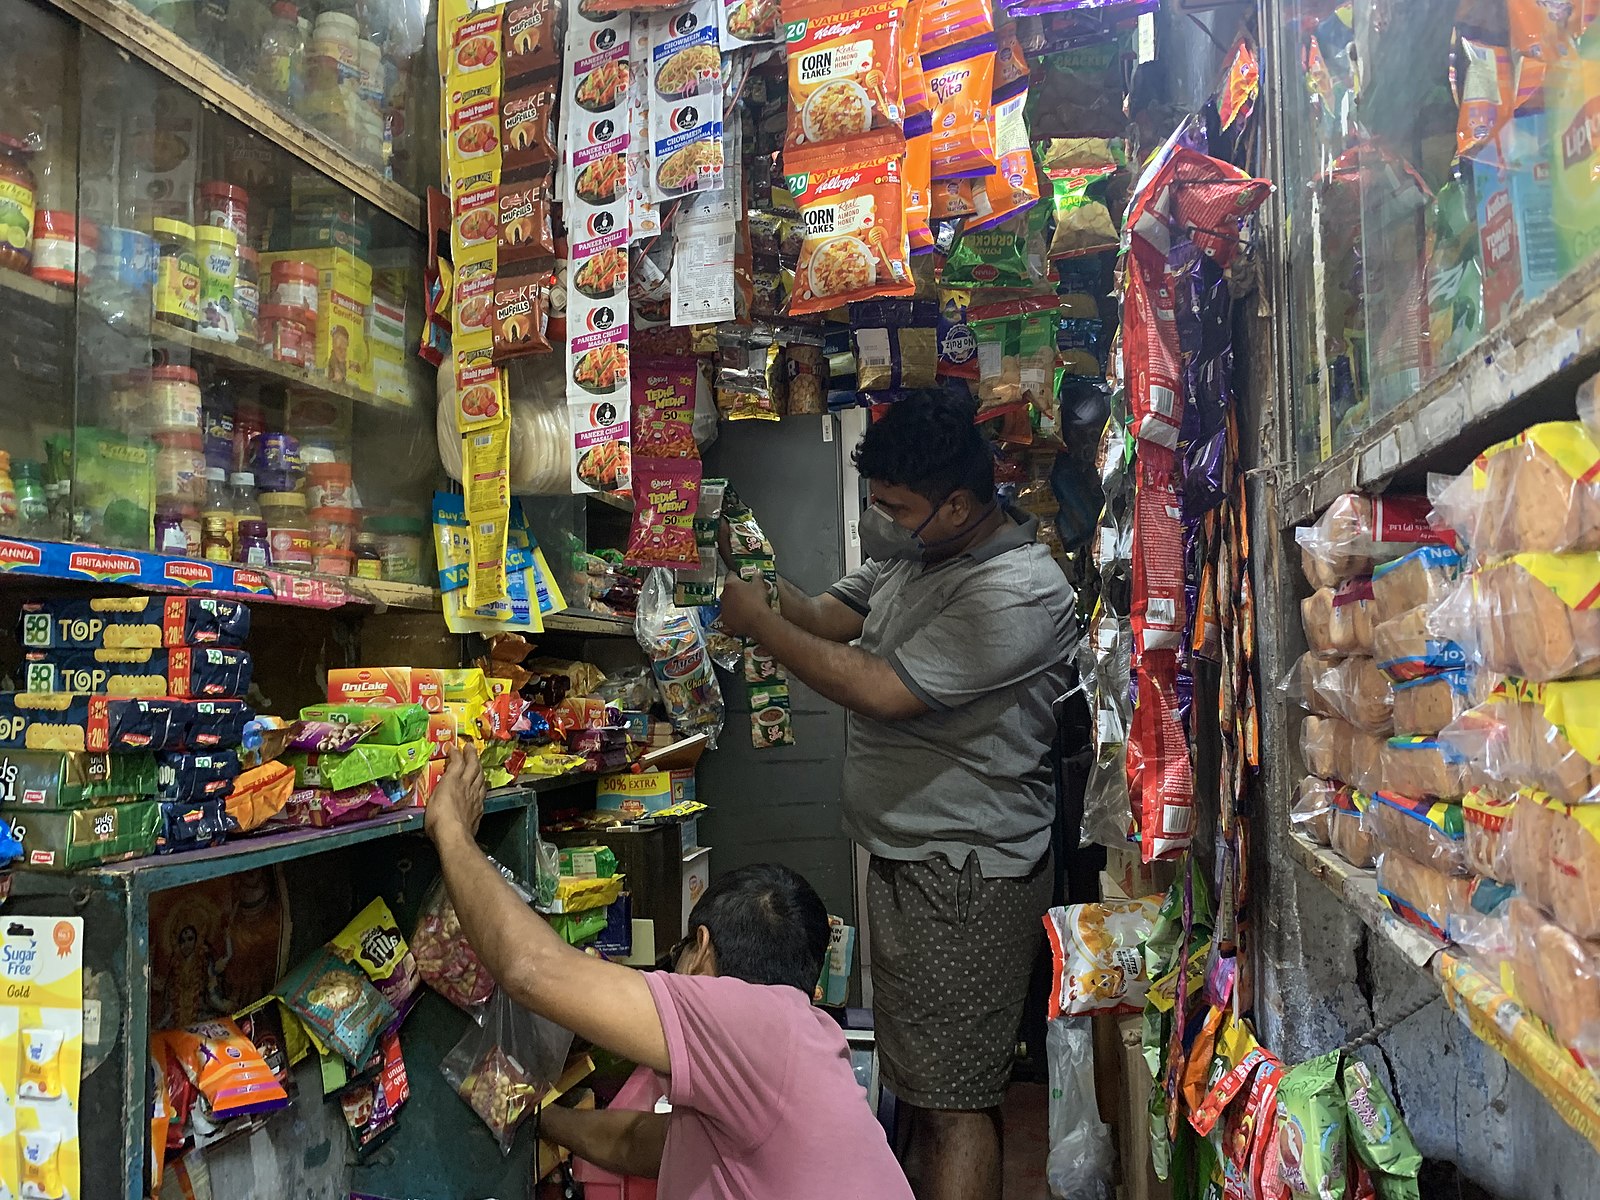 an image of two people wearing face masks, who are restocking shelves in a small corner shop